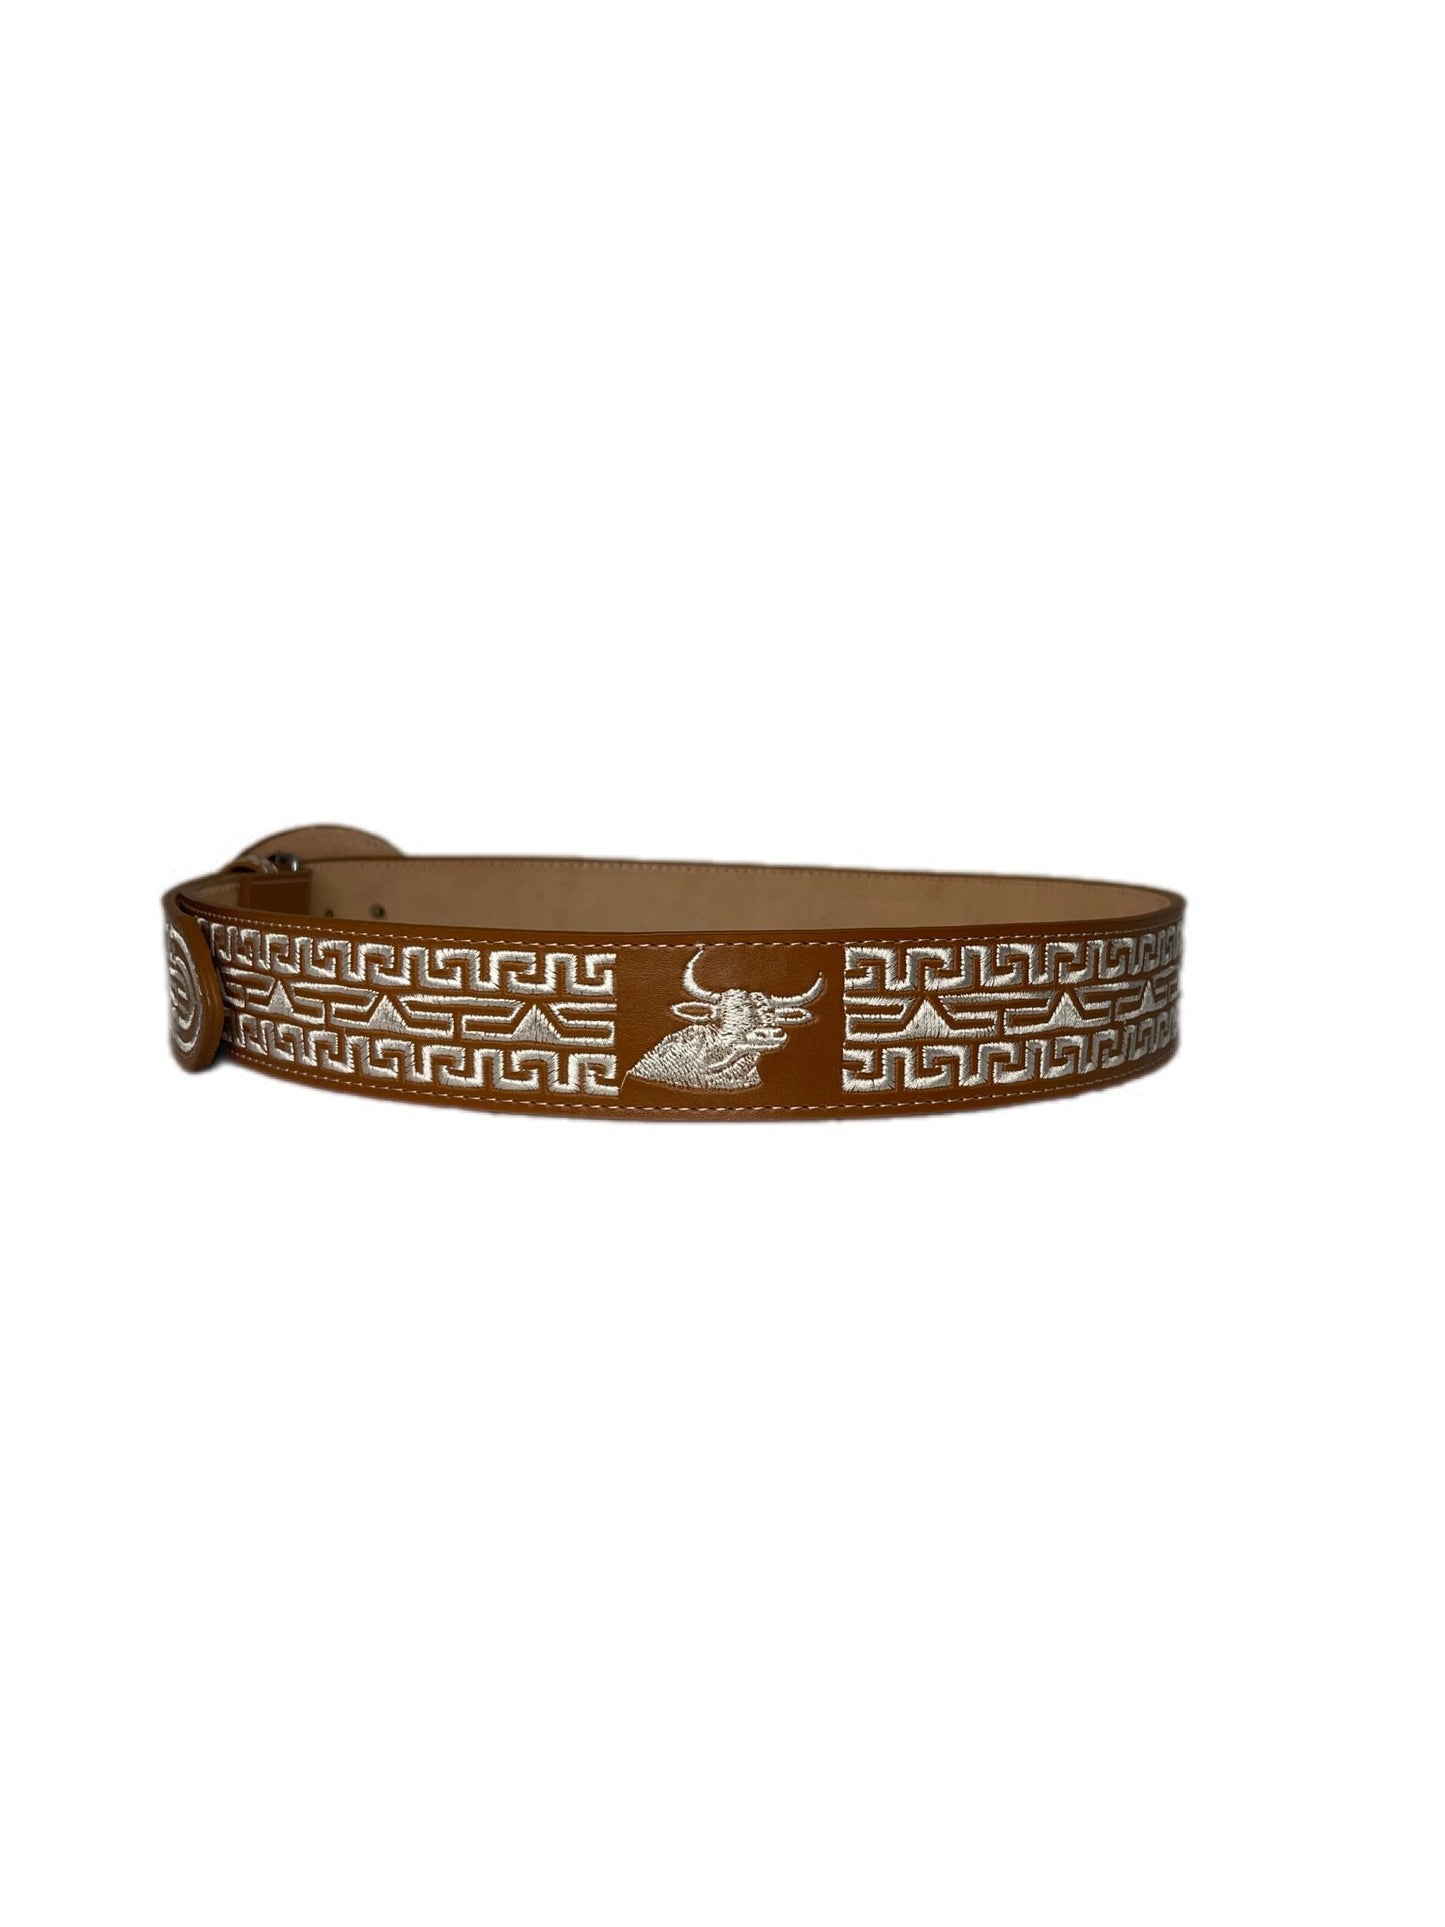 Brown And White Bull Texture Belt - Frontera Western Wear